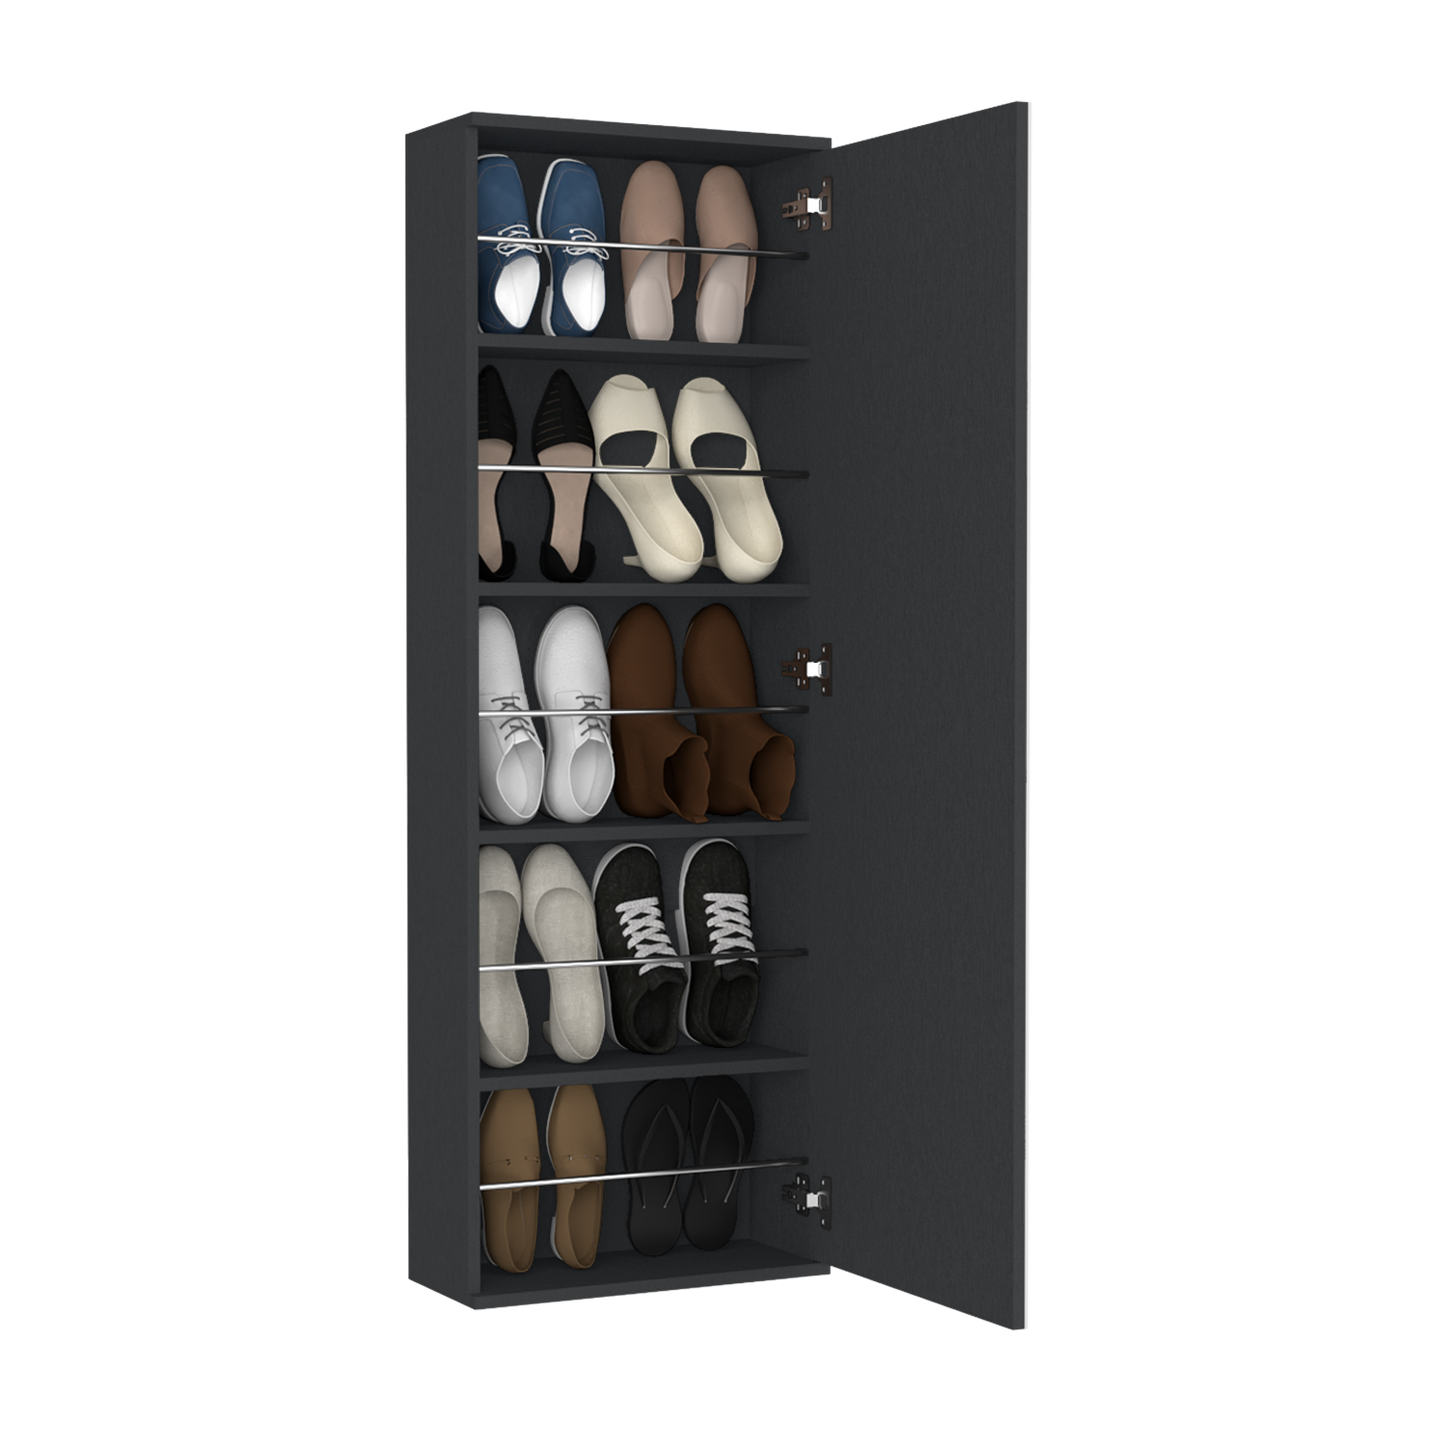 Wall Mounted Shoe Rack With Mirror Chimg, Single Door, Black Wengue Finish-3